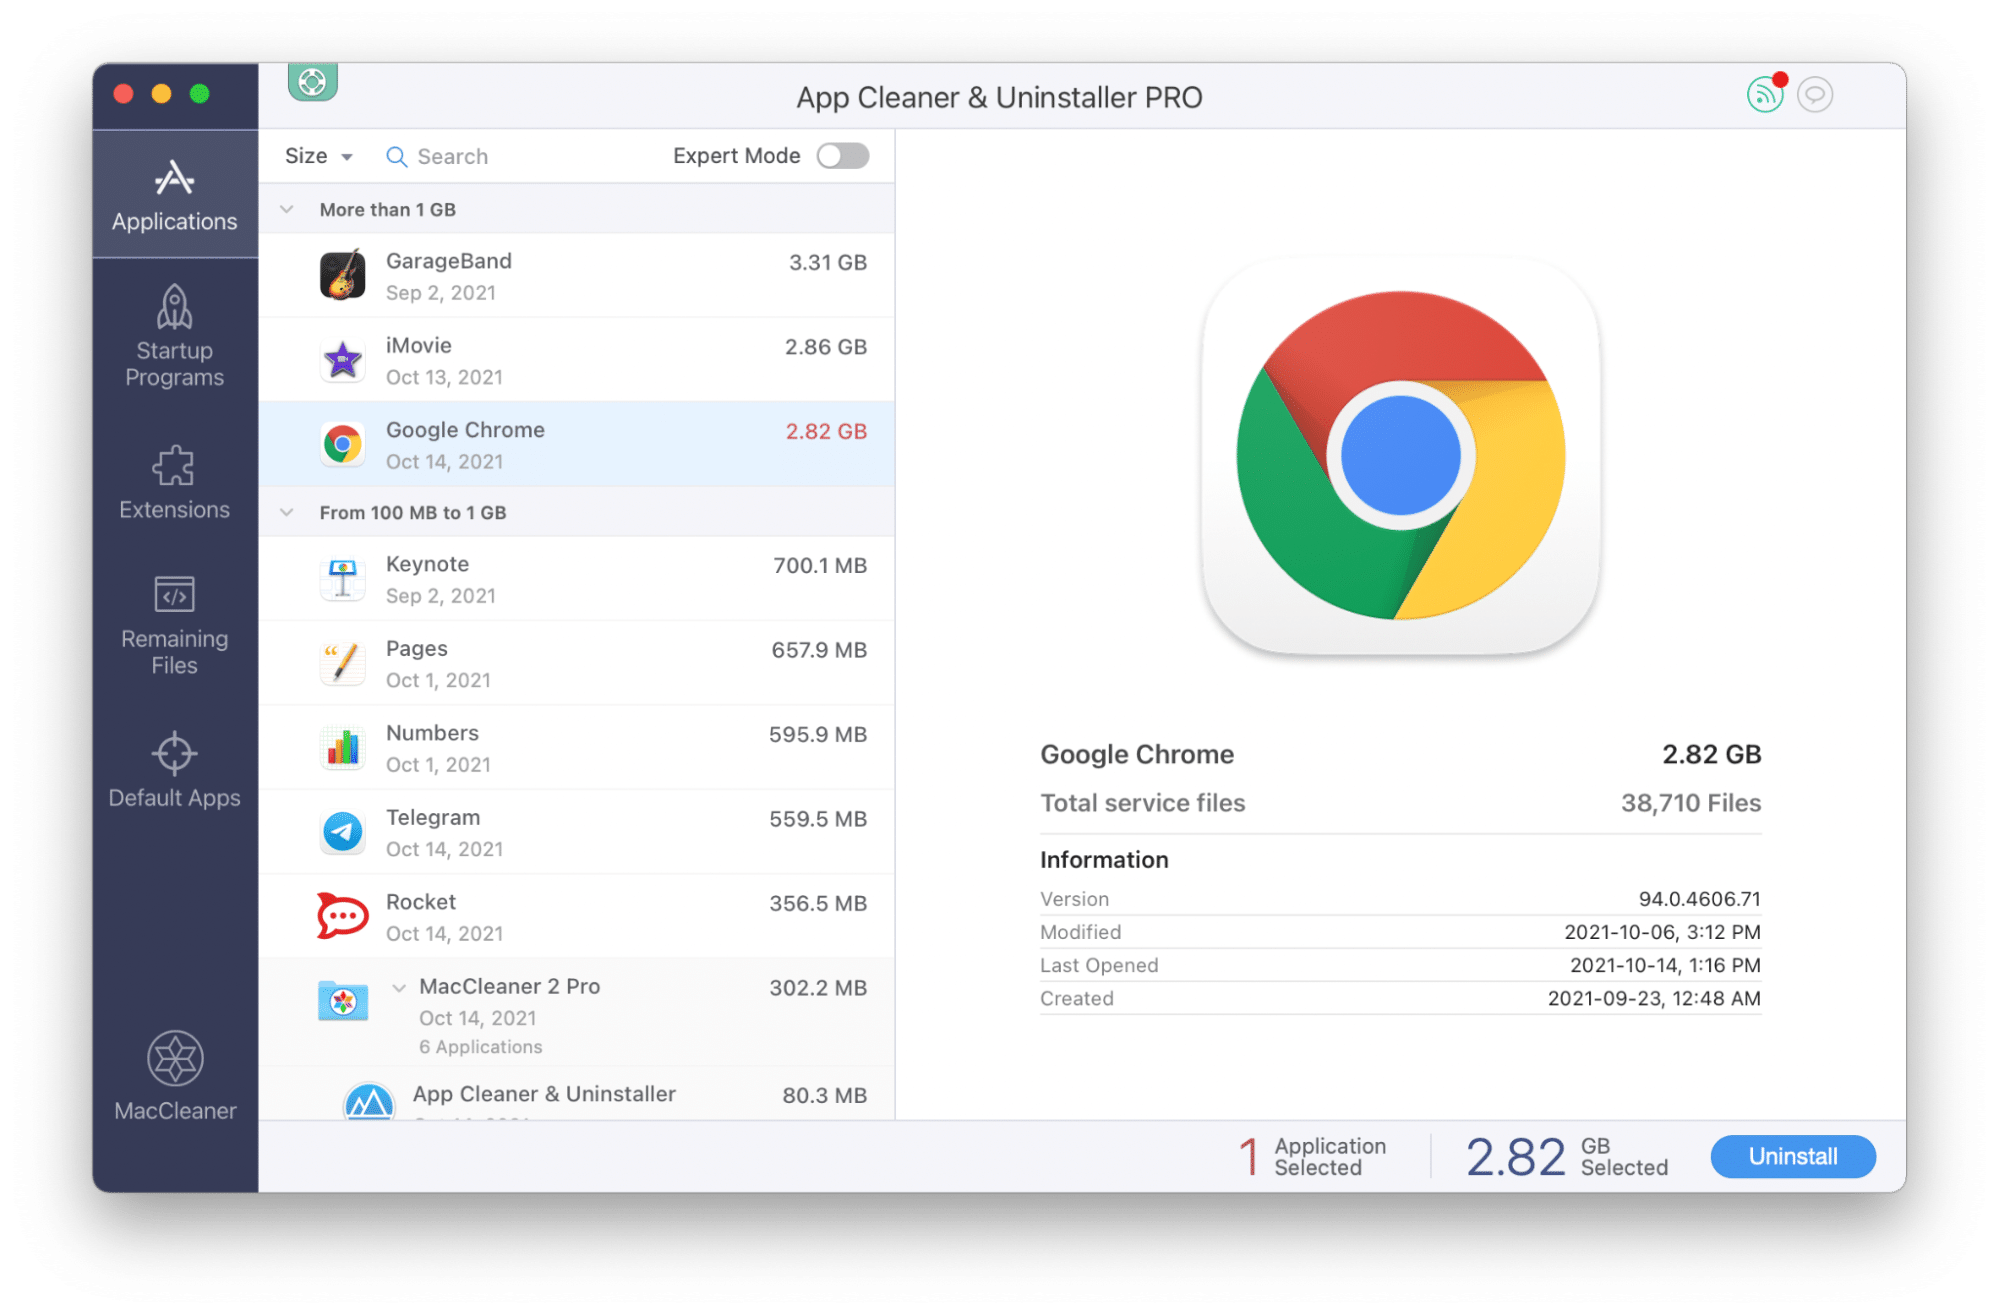 Chrome selected for removal with App Cleaner & Uninstaller